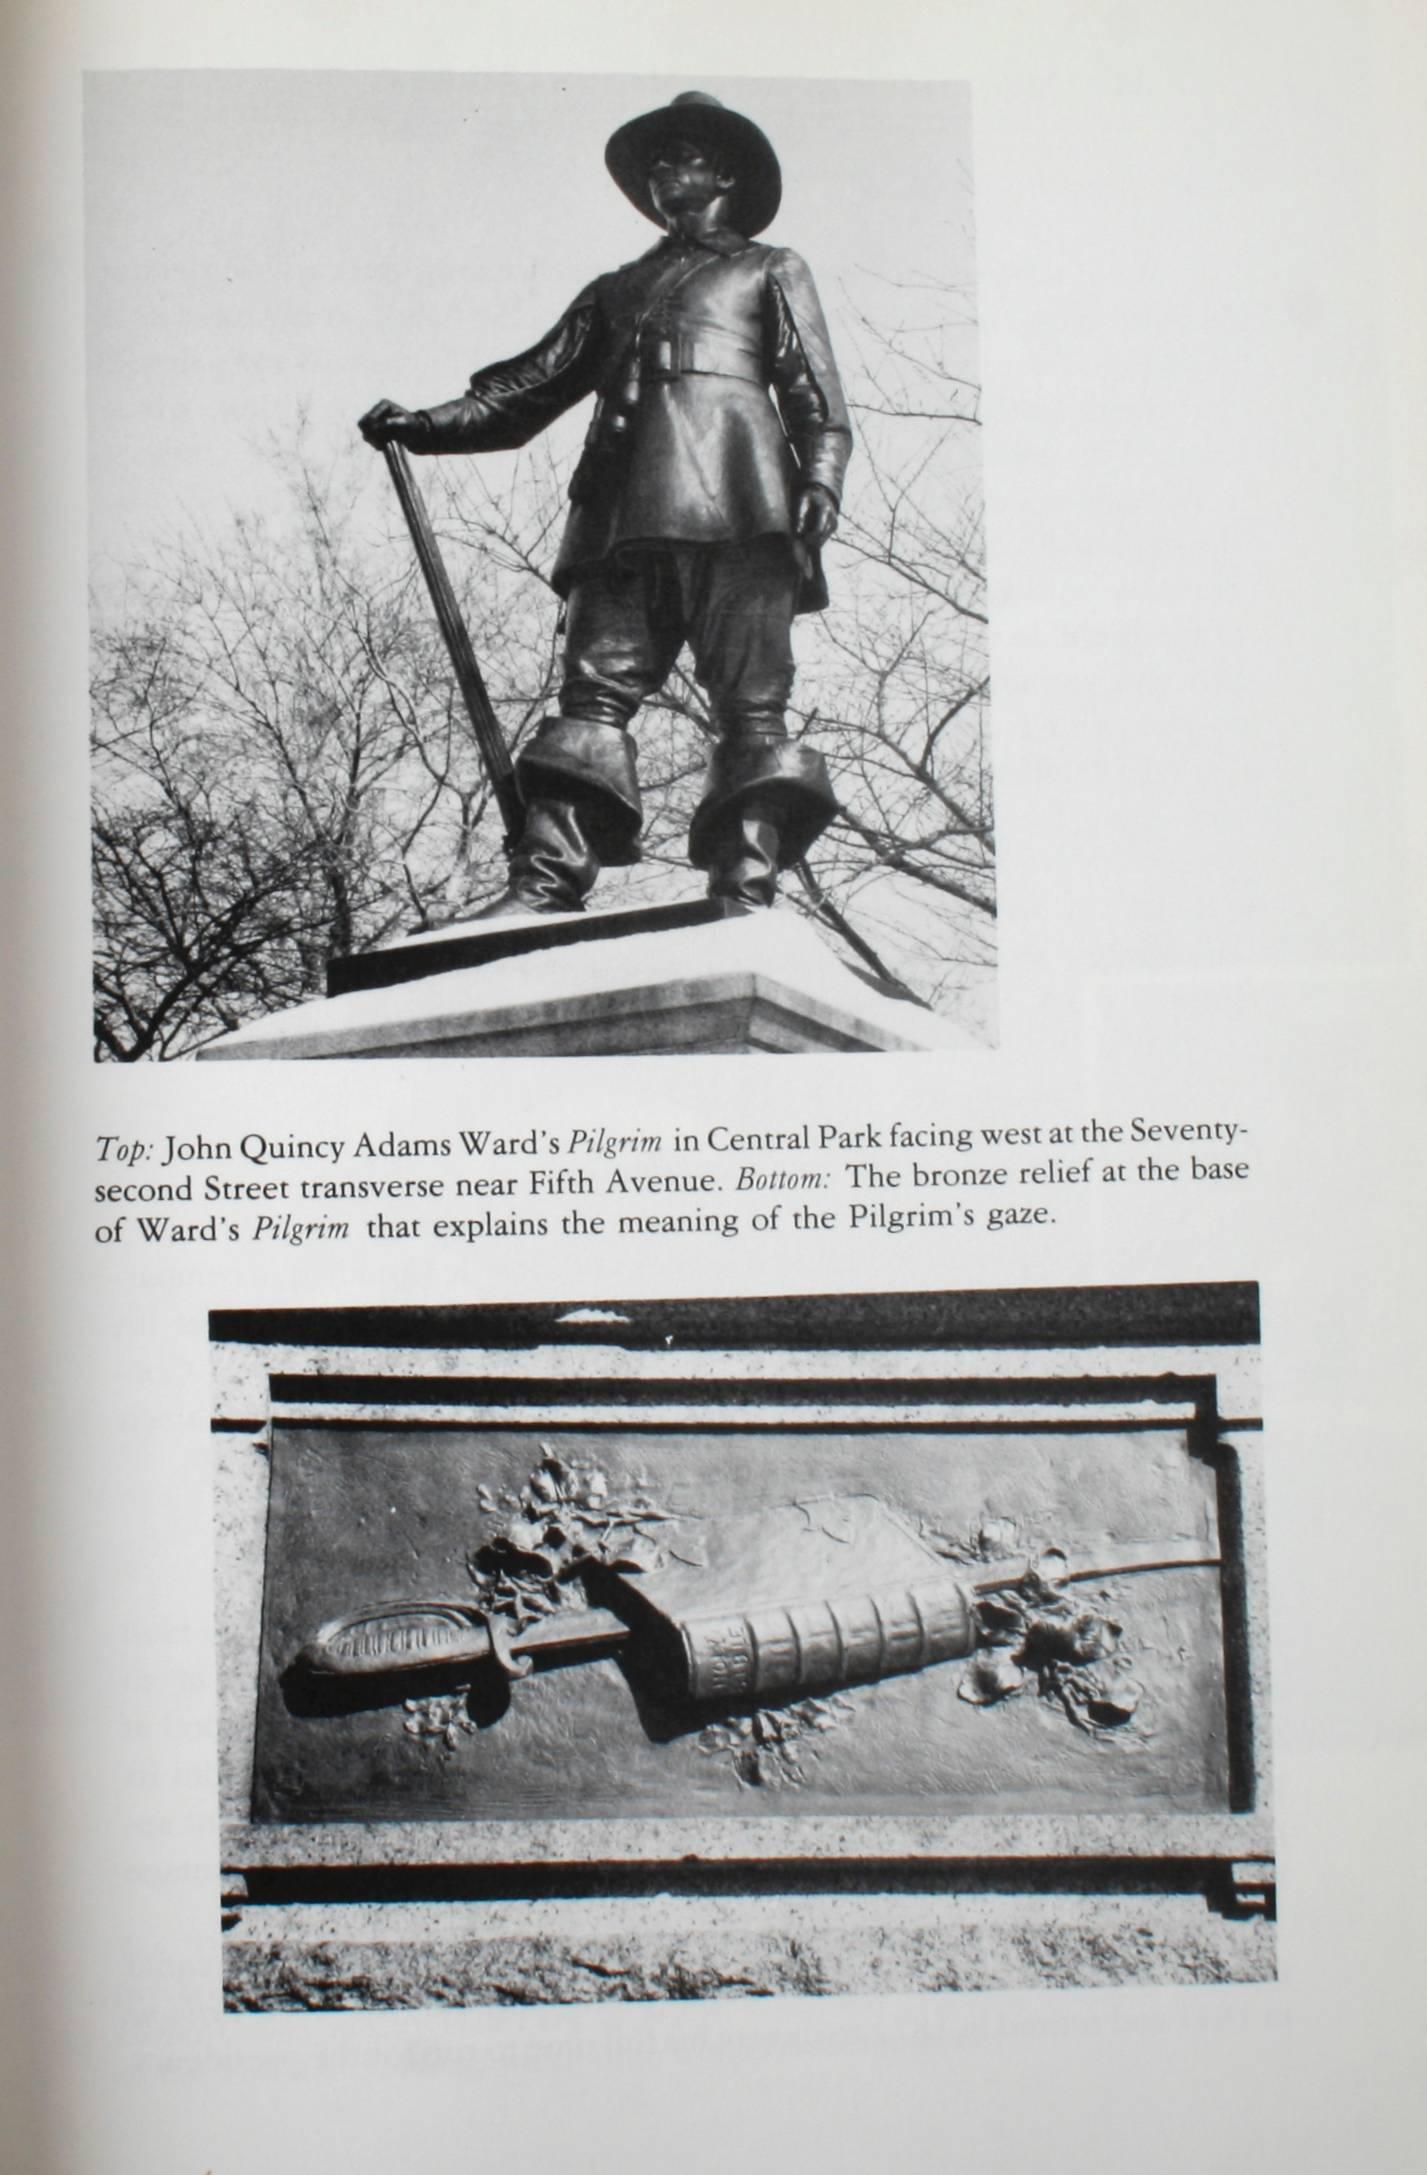 American Monuments and Masterpieces Histories and Views of Public Sculpture in NYC 1st Ed For Sale